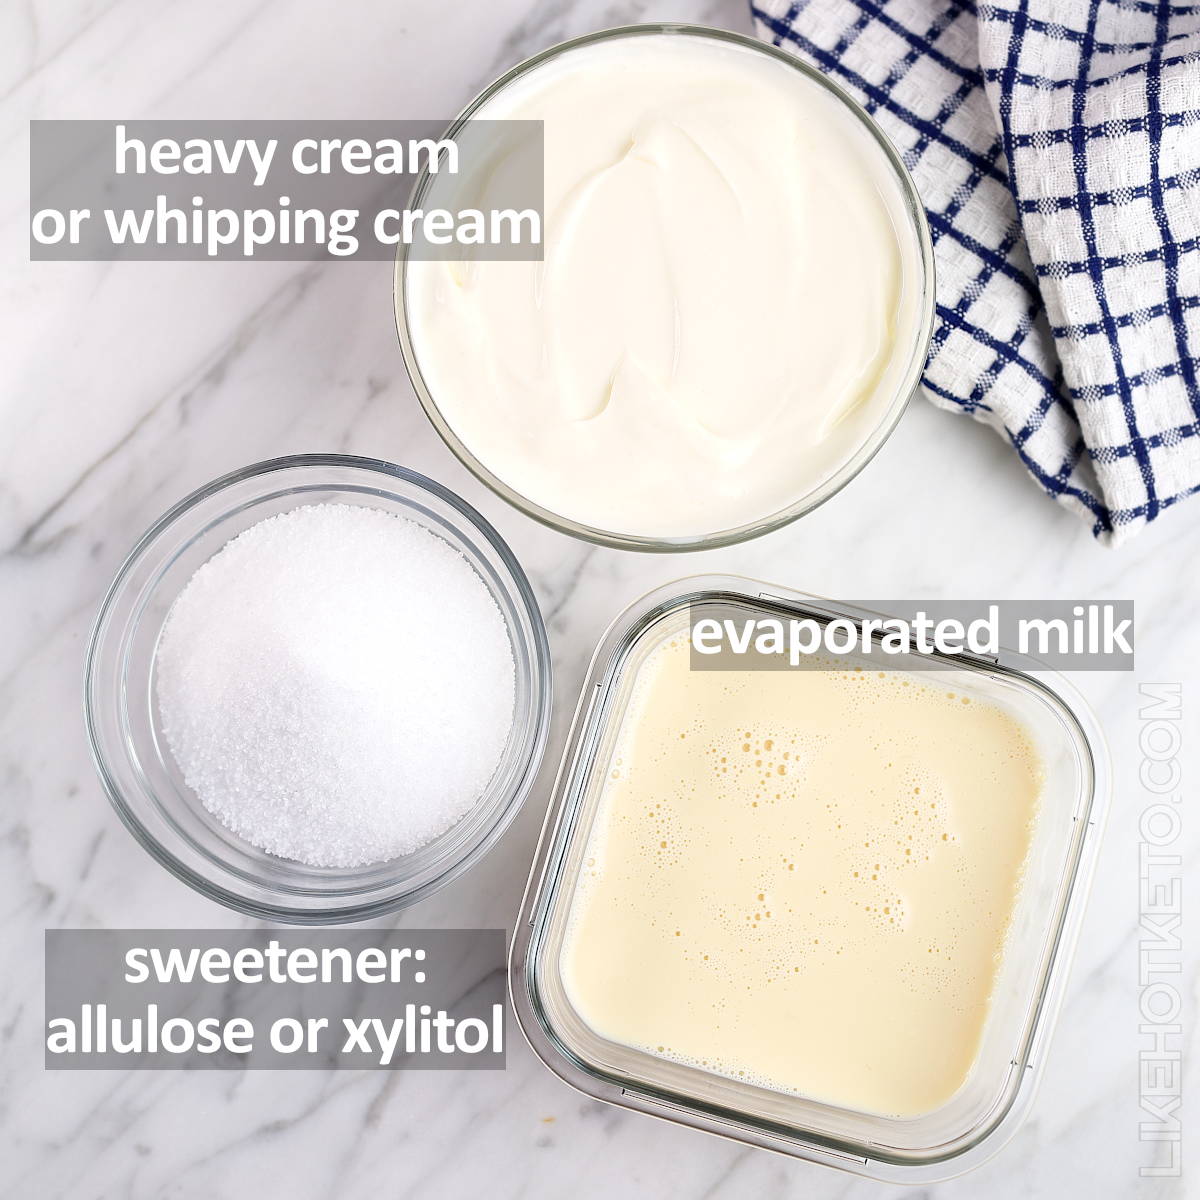 Ingredients for low-carb condensed milk: heavy or whipping cream, xylitol or allulose sweetener and evaporated milk.